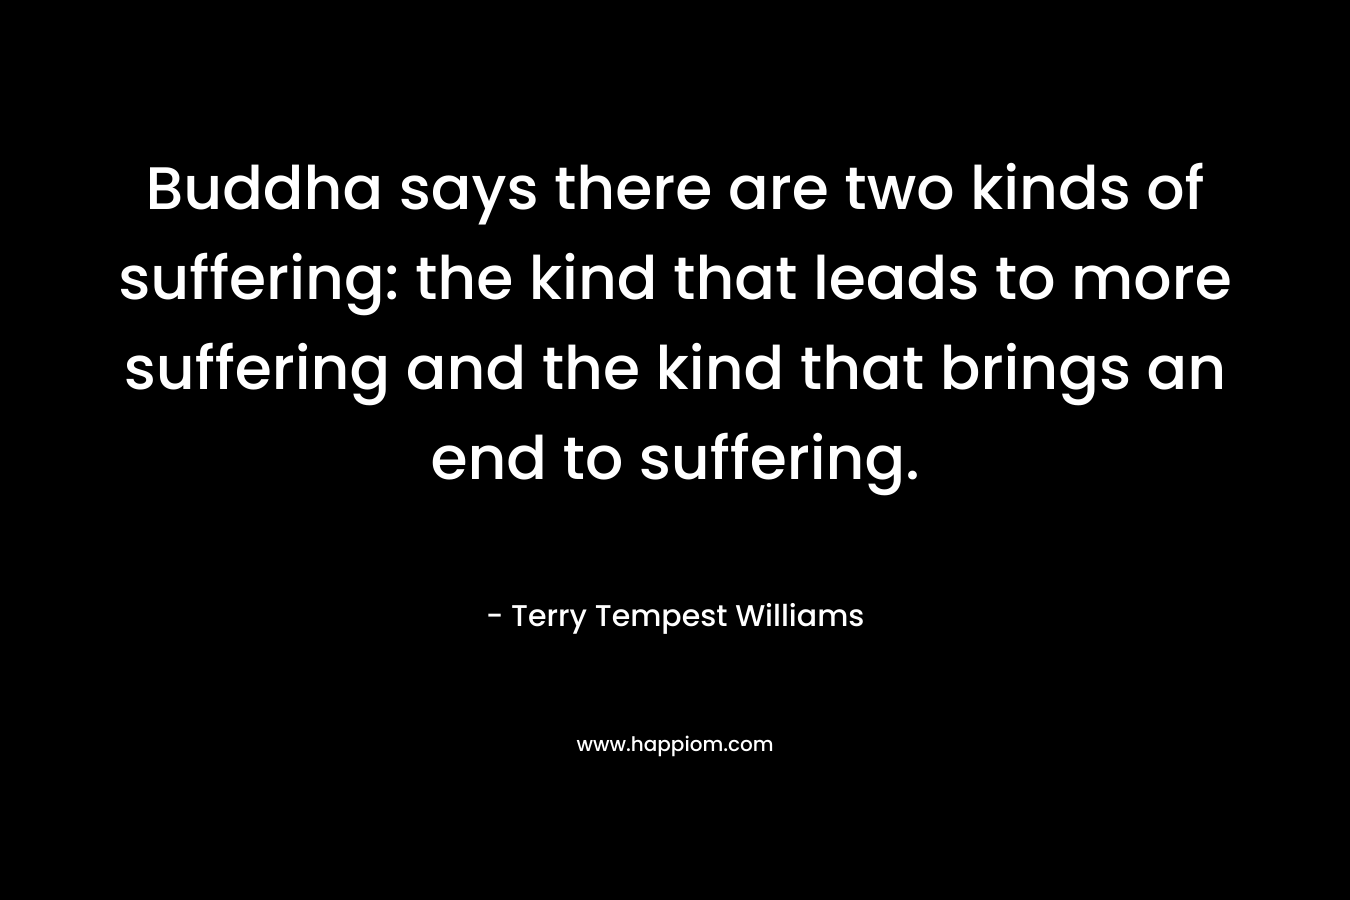 Buddha says there are two kinds of suffering: the kind that leads to more suffering and the kind that brings an end to suffering.